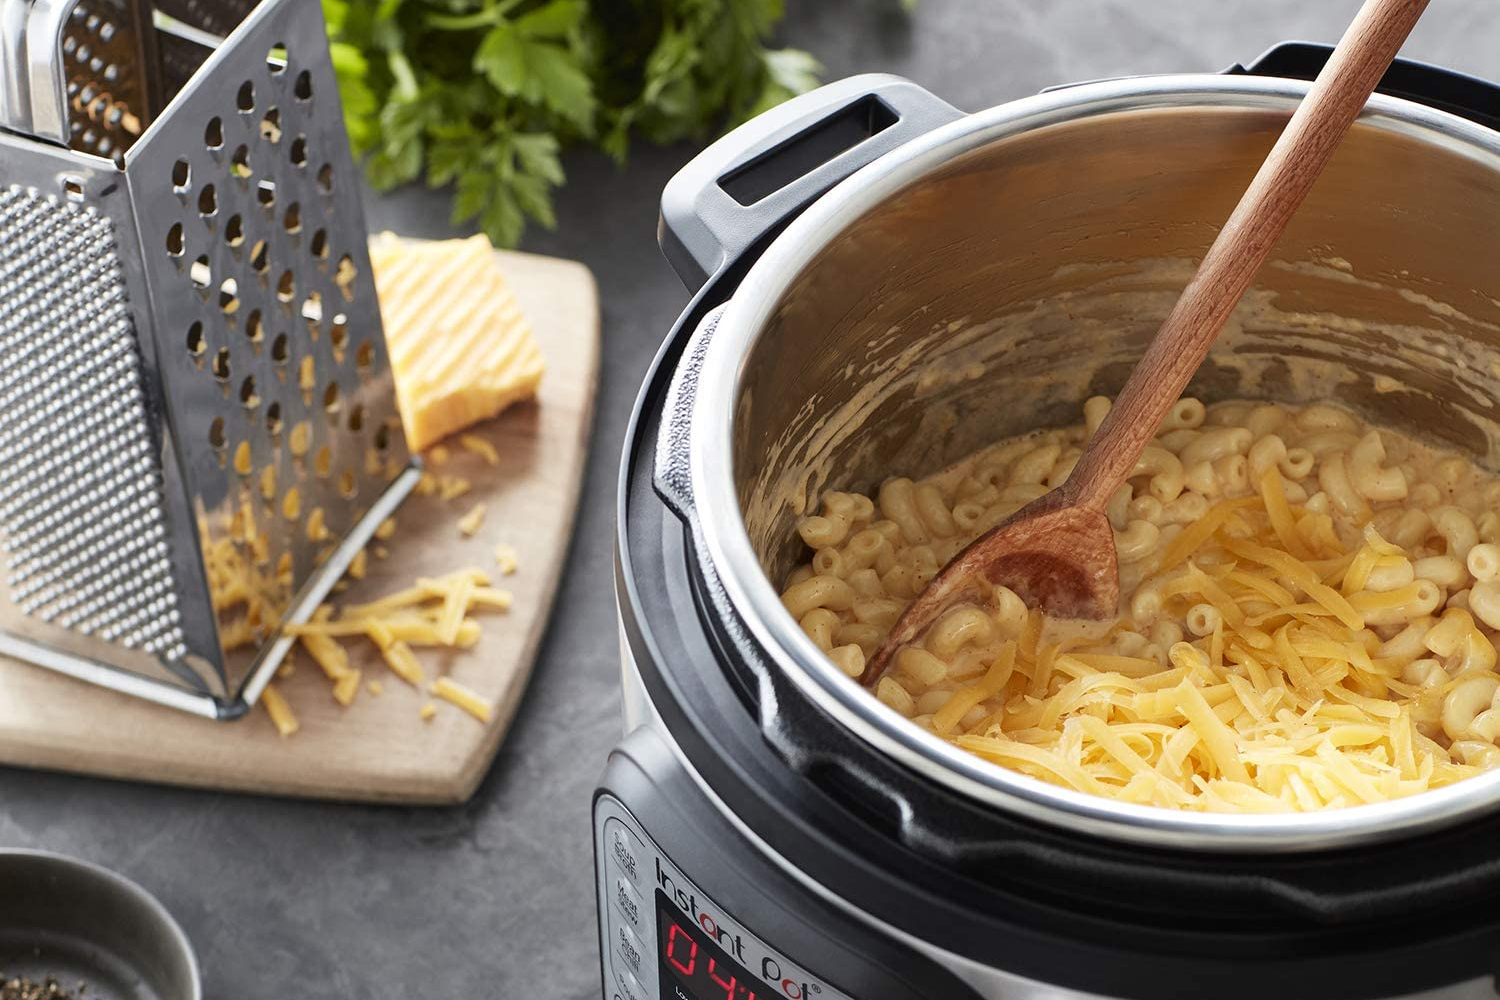 12 Must-Have Instant Pot Accessories - Drizzle Me Skinny!